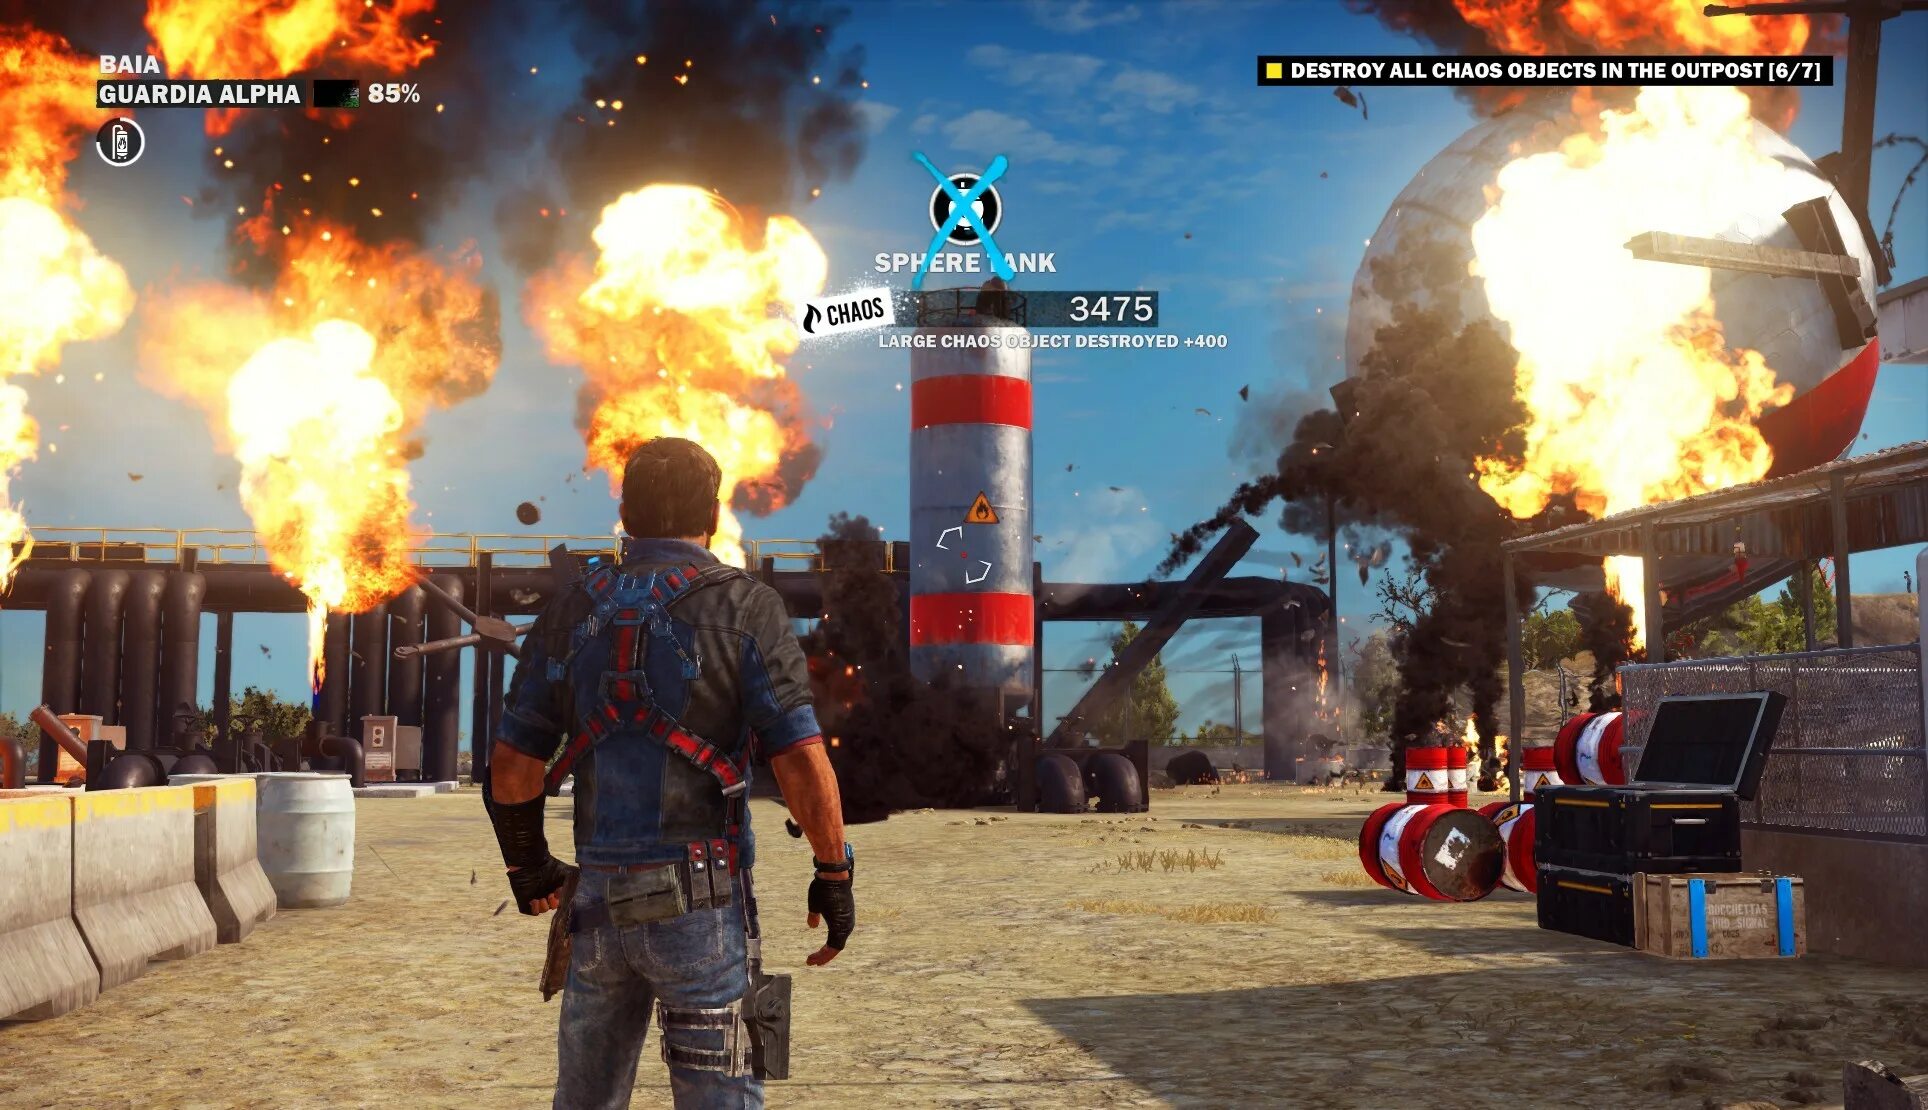 Игра just one. Игра just cause 3. Just cause 3 Gameplay. Just cause 3: Multiplayer Mod. Just cause 1.